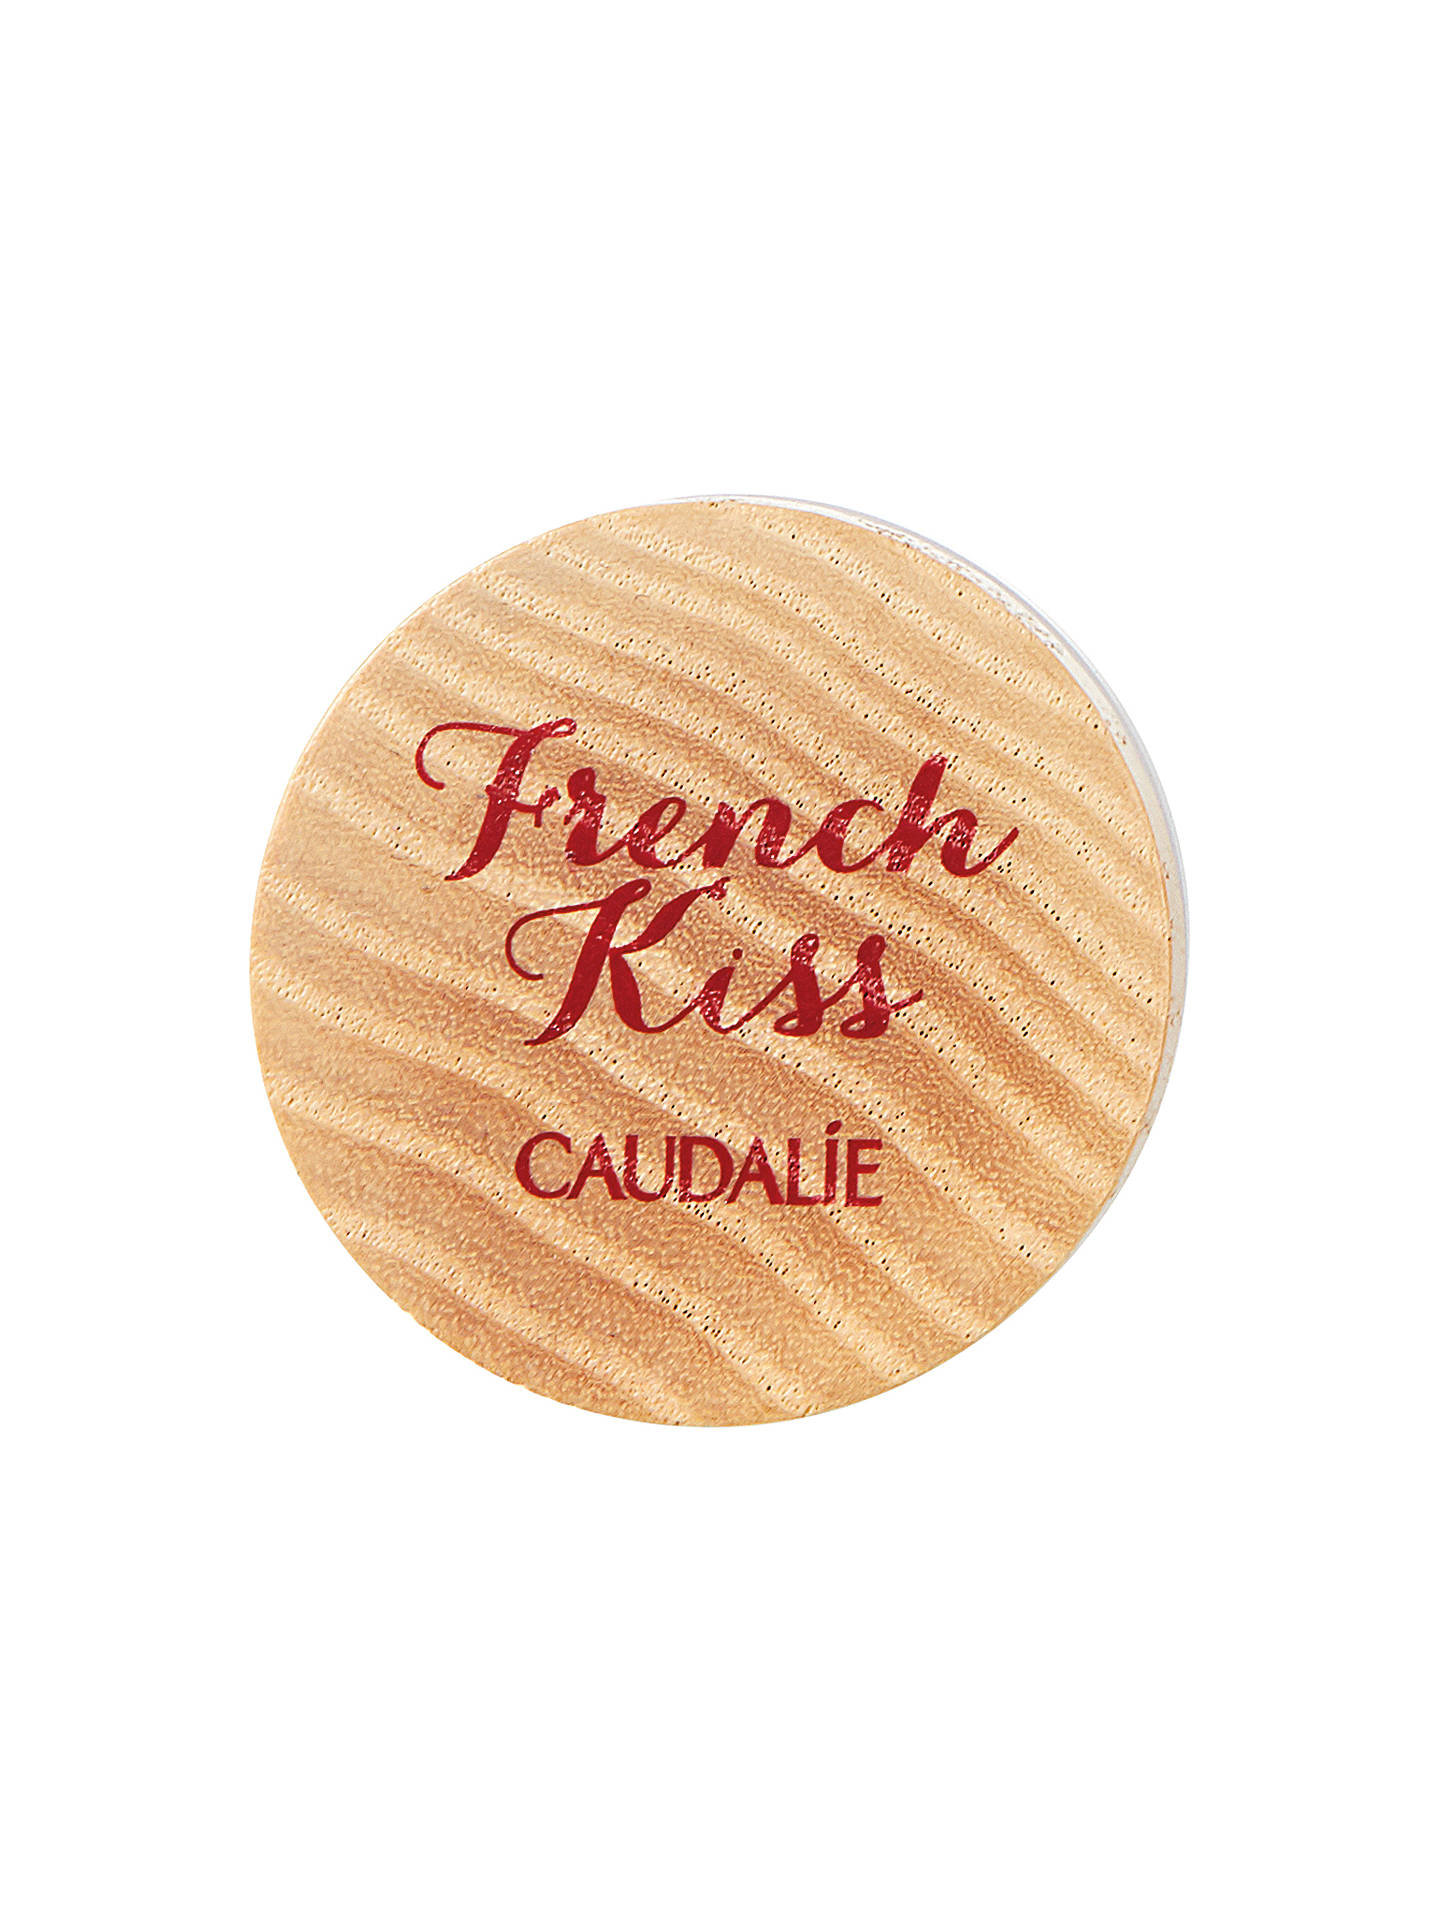 Buy Caudalie French Kiss Tinted Lip Balm, Addiction Online at johnlewis.com